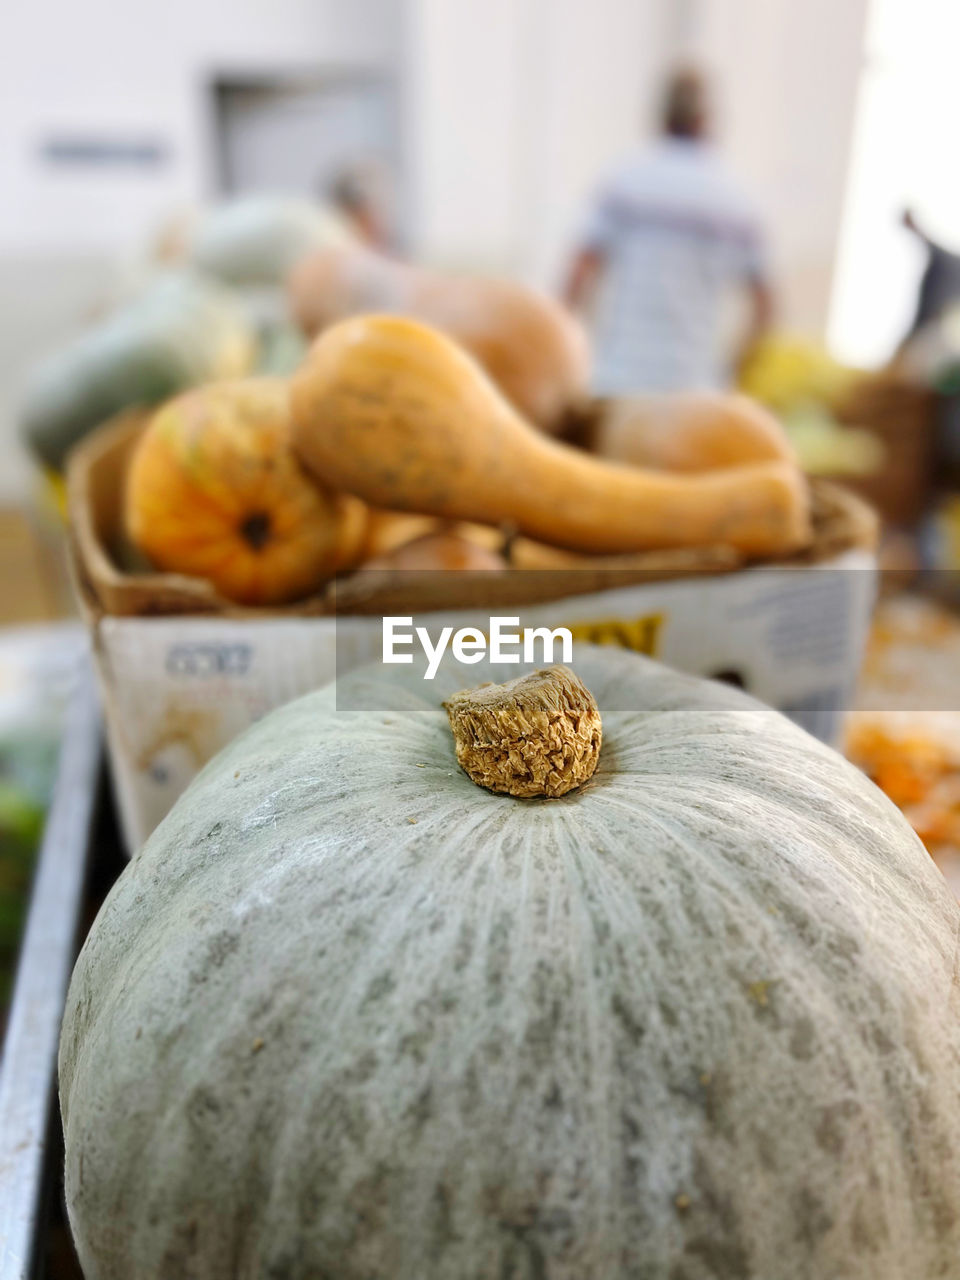 food and drink, food, pumpkin, healthy eating, vegetable, freshness, wellbeing, focus on foreground, squash, winter squash, produce, gourd, no people, indoors, close-up, day, squash - vegetable, autumn, still life, retail, organic, selective focus, plant